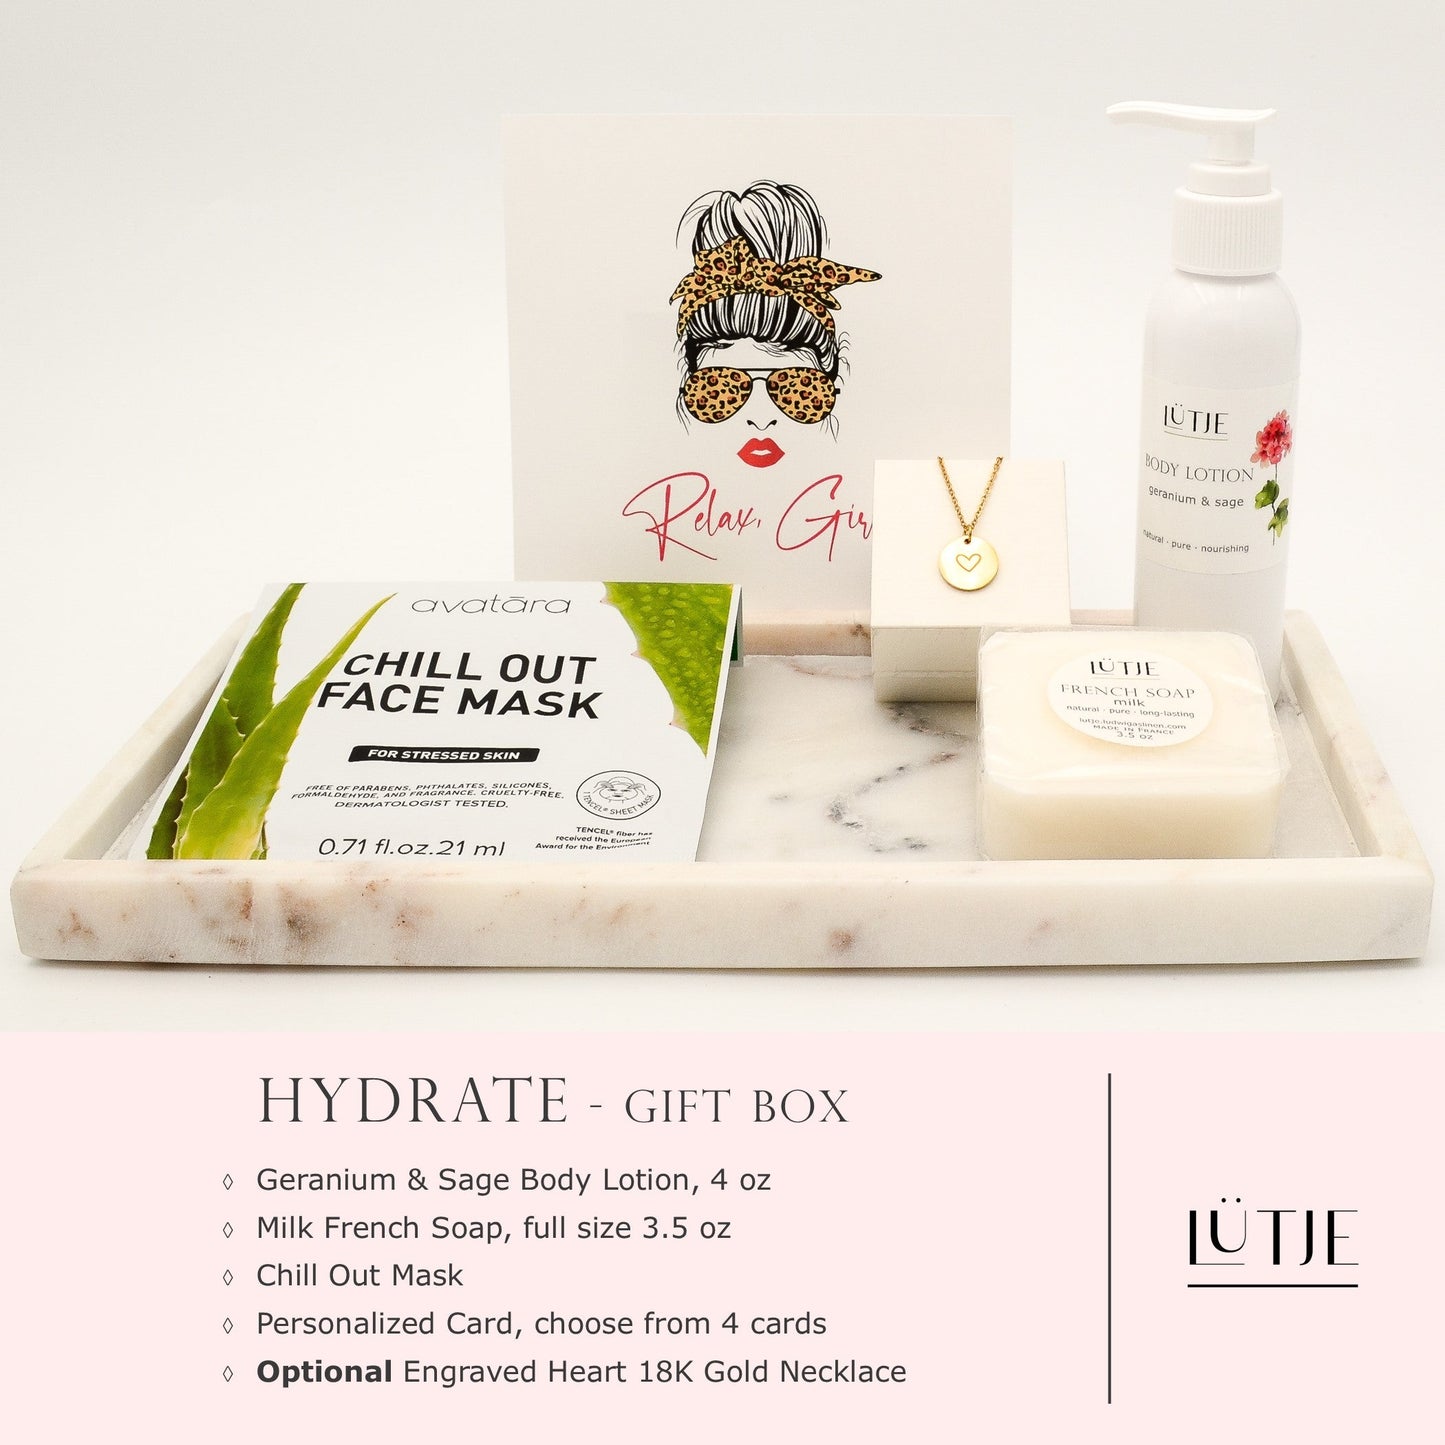 Hydrate Gift Box for women, daughter, mom, BFF, wife, sister or grandma, includes Geranium & Sage body lotion, French soap, hydrating face mask, and 18K gold-plated necklace with engraved heart.